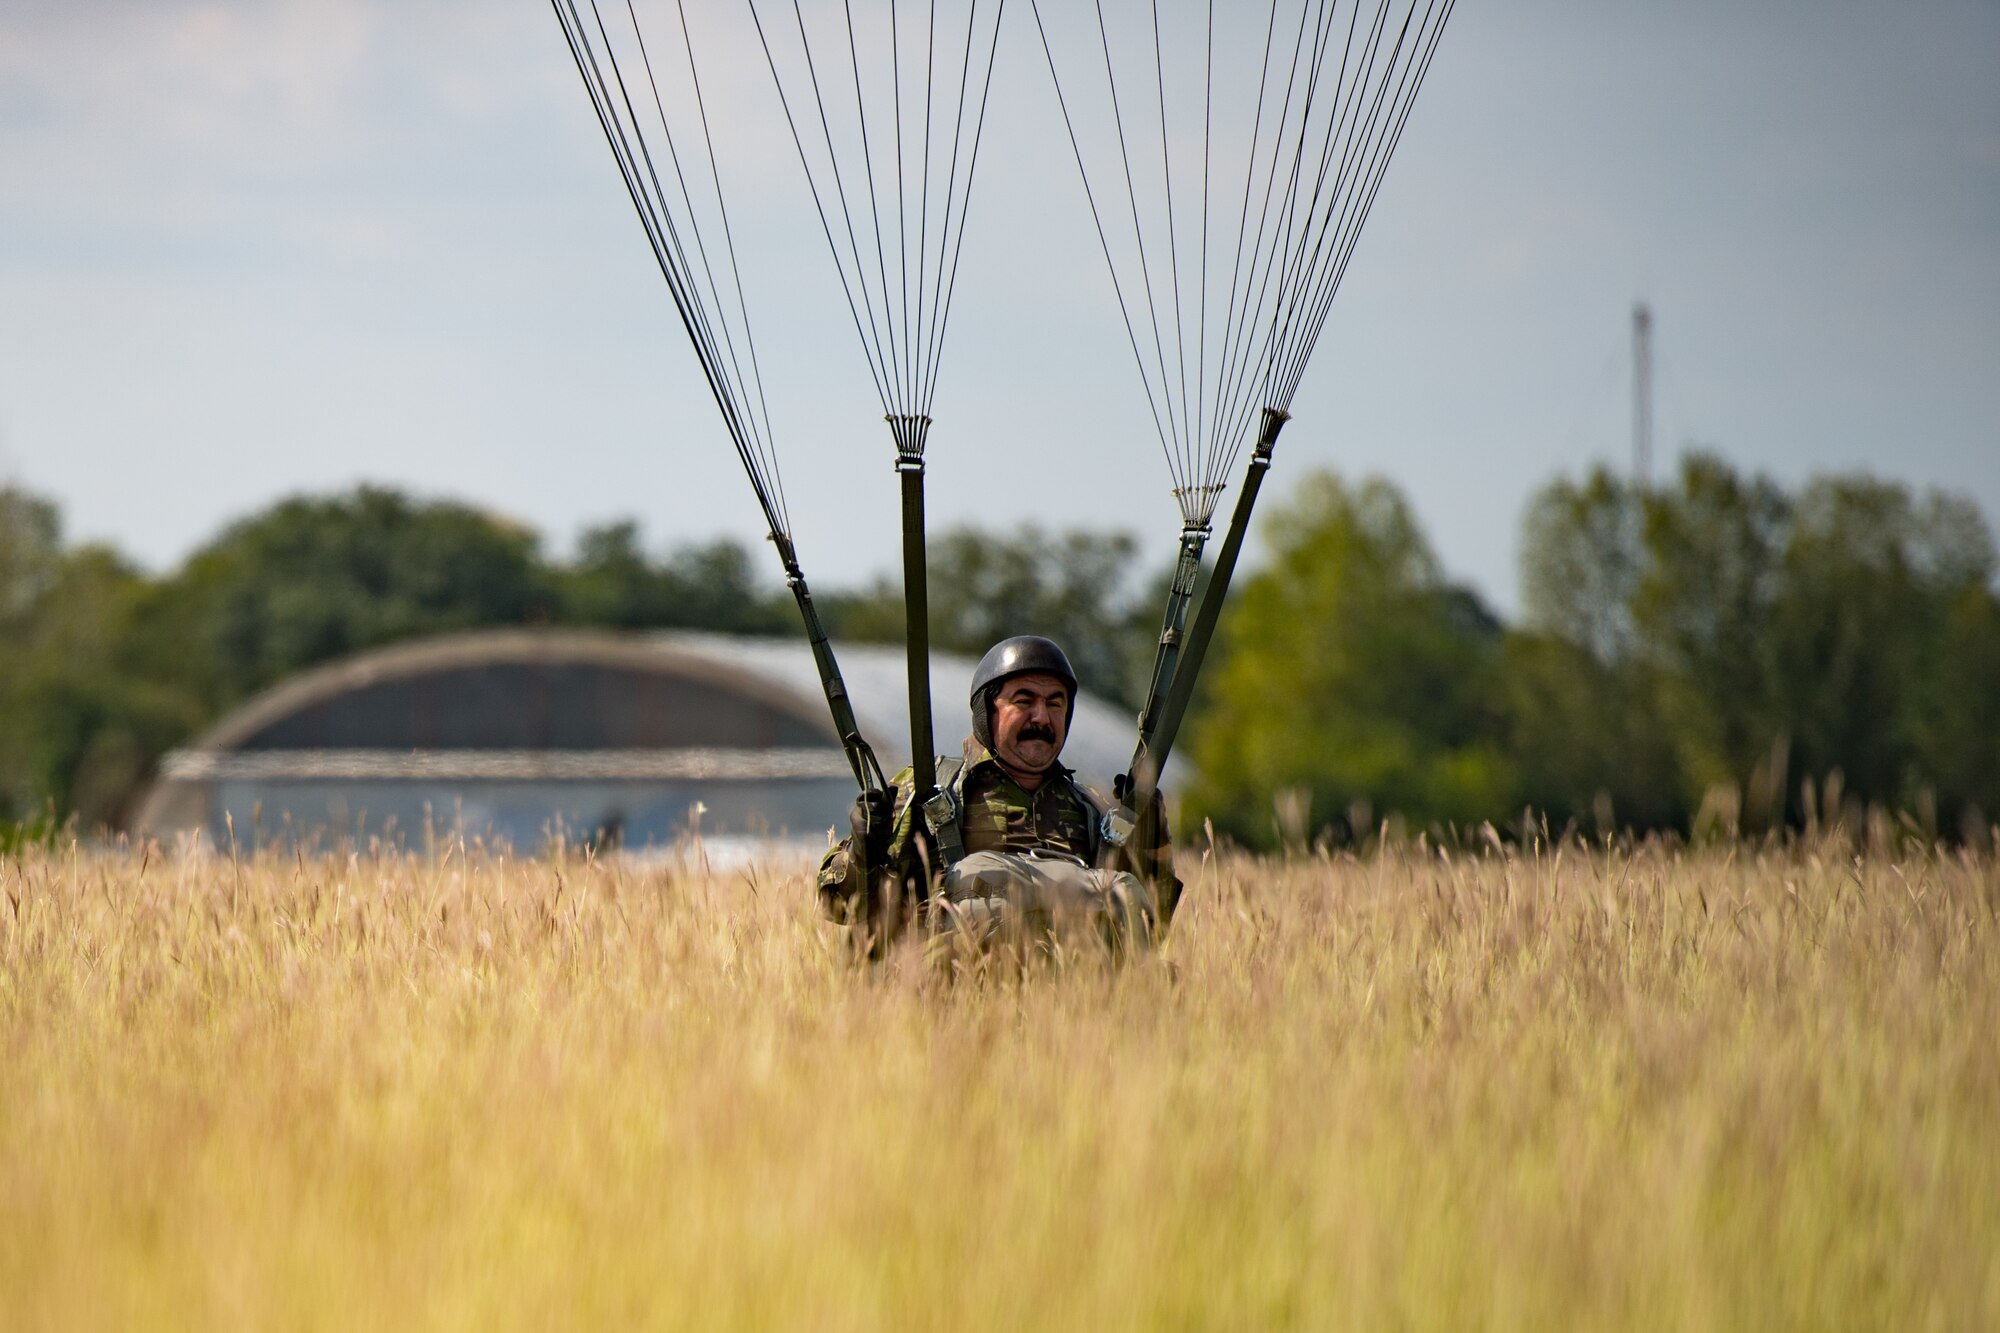 A Romanian air force paratrooper lands on a dropzone at Boboc Air Base, Romania, Aug. 23, 2018. The paratrooper jumped out of a U.S. Air Force C-130J Super Hercules aircraft as part of Carpathian Summer 2018, a bilateral training exercise designed to enhance interoperability and readiness of forces by conducting combined air operations with the Romanian air force. (U.S. Air Force photo by Senior Airman Devin Boyer)